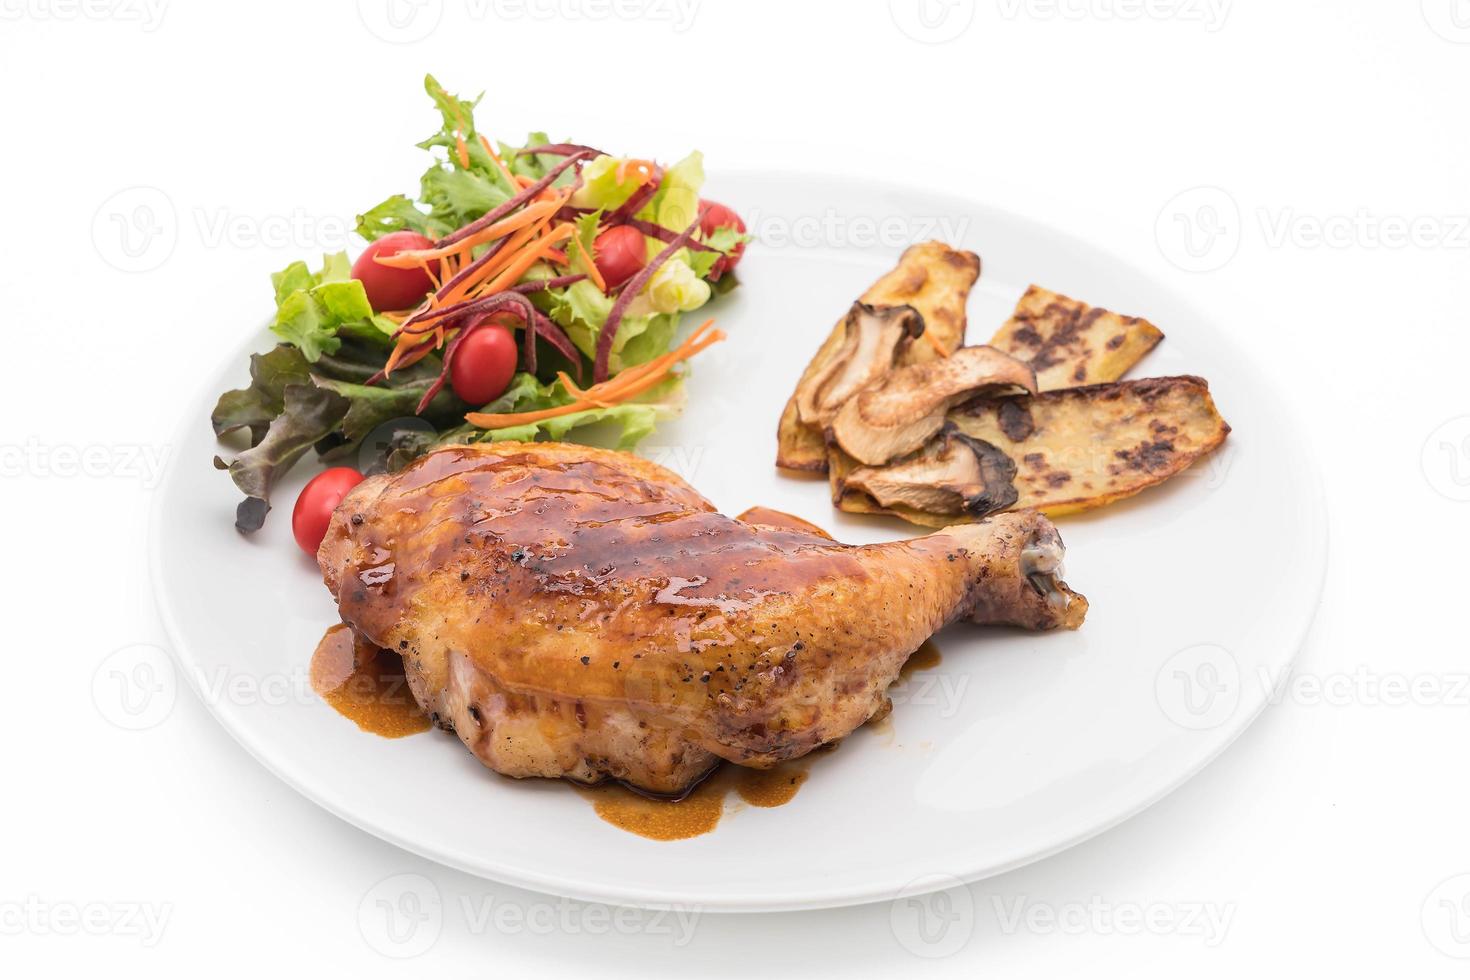 Grilled chicken steak with teriyaki sauce on dining table photo